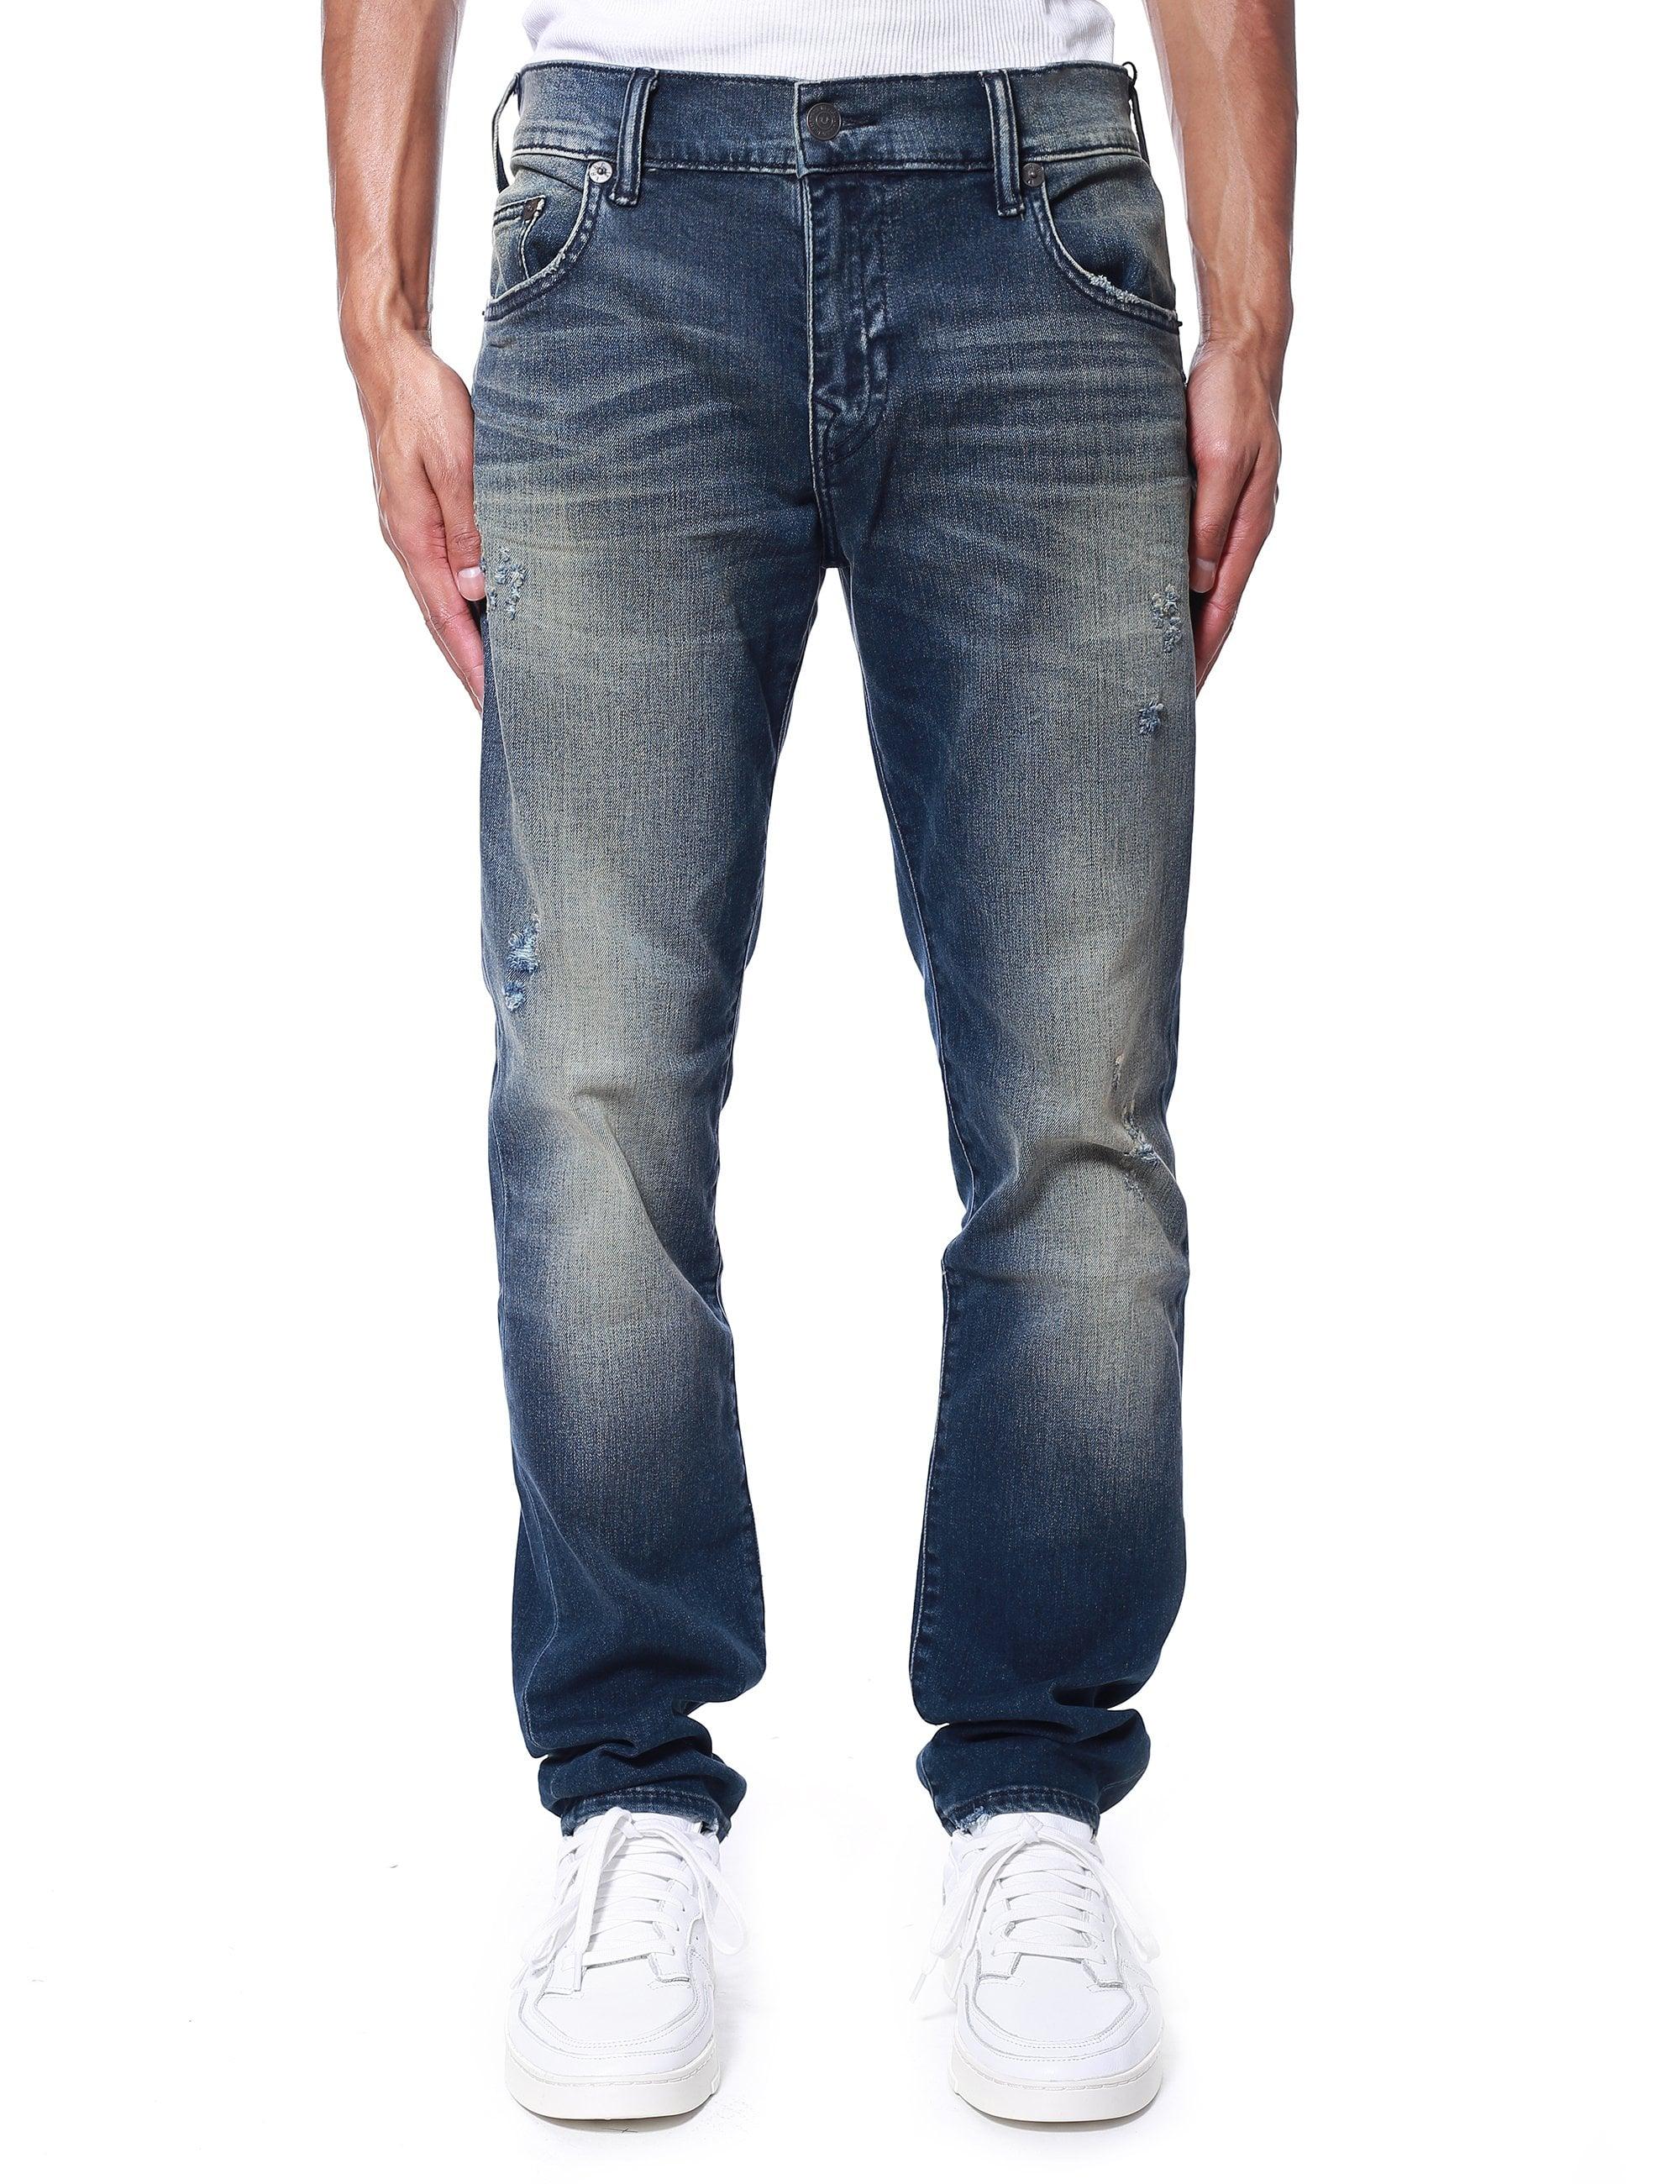 True Religion Denim Rocco Relaxed Skinny Jeans in Blue for Men - Lyst